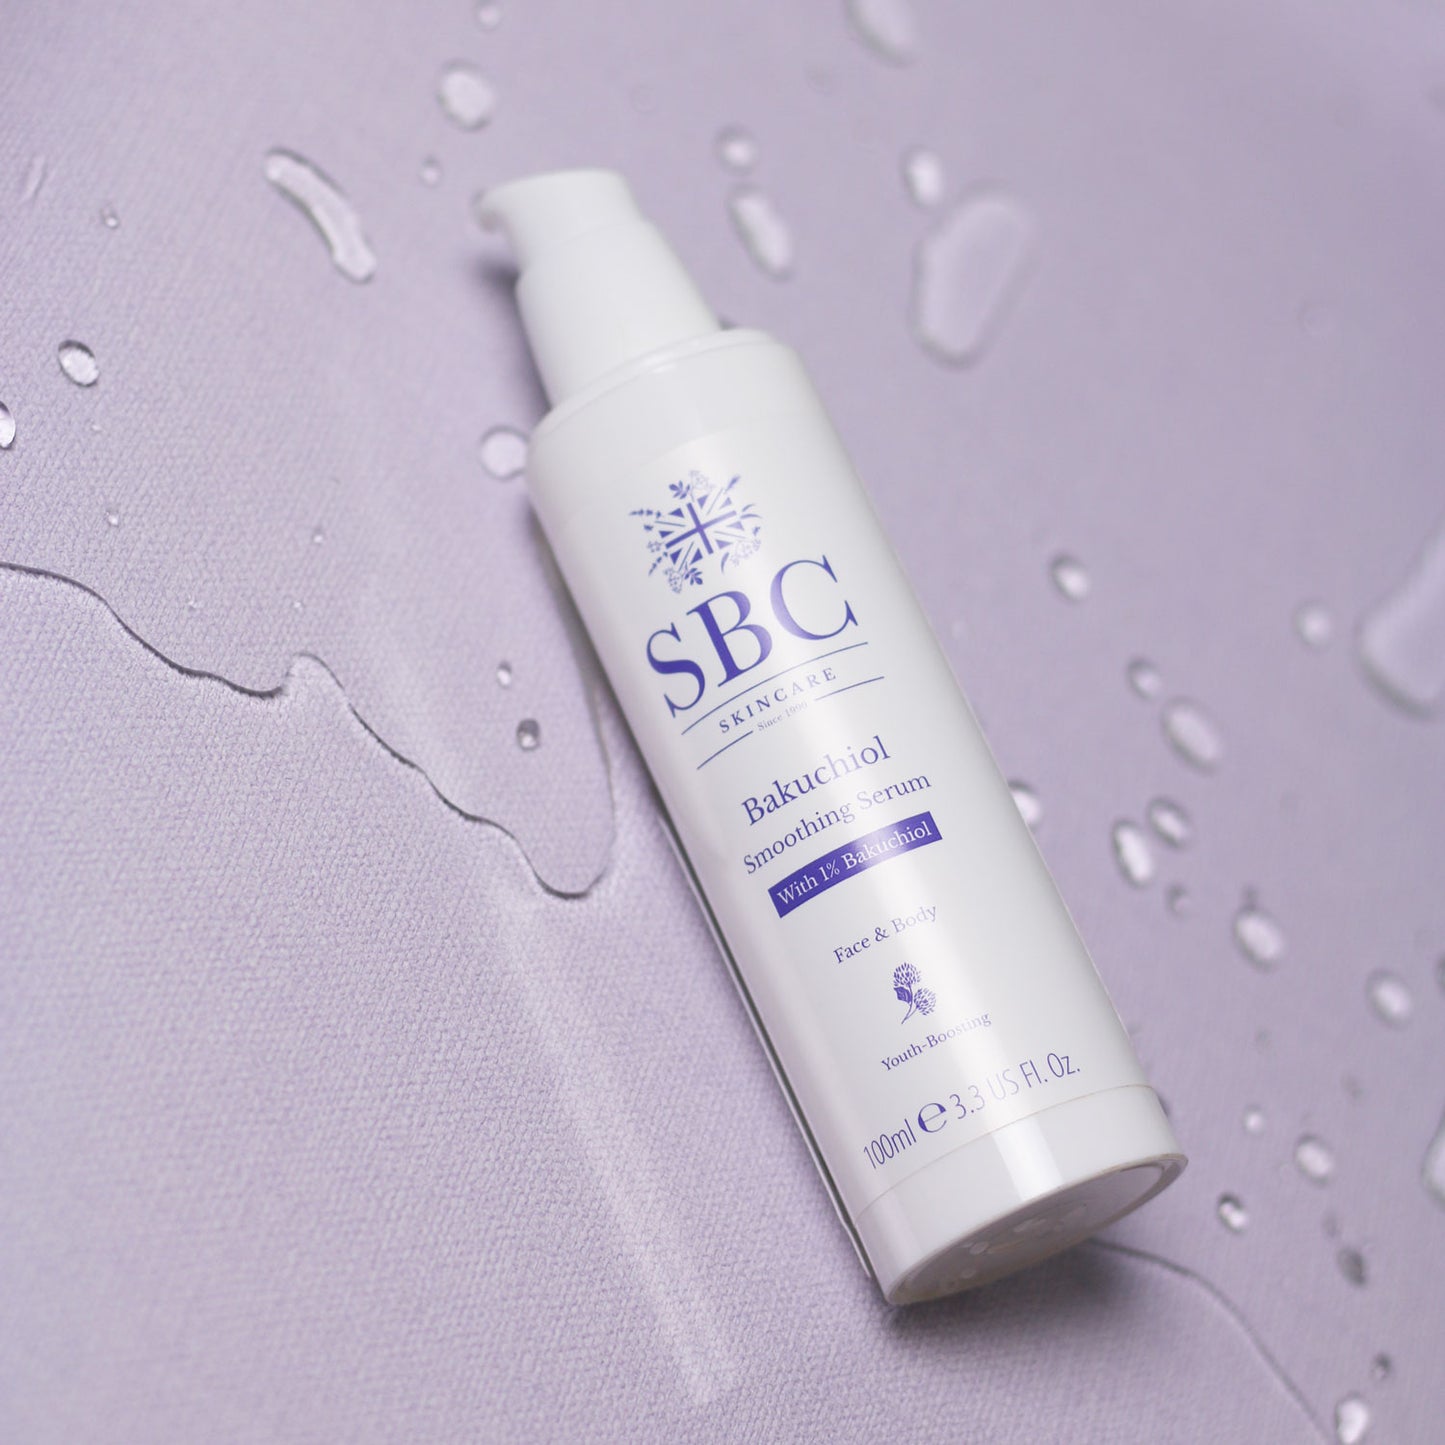 Bakuchiol Smoothing Serum laying on a purple surface with splashes of water